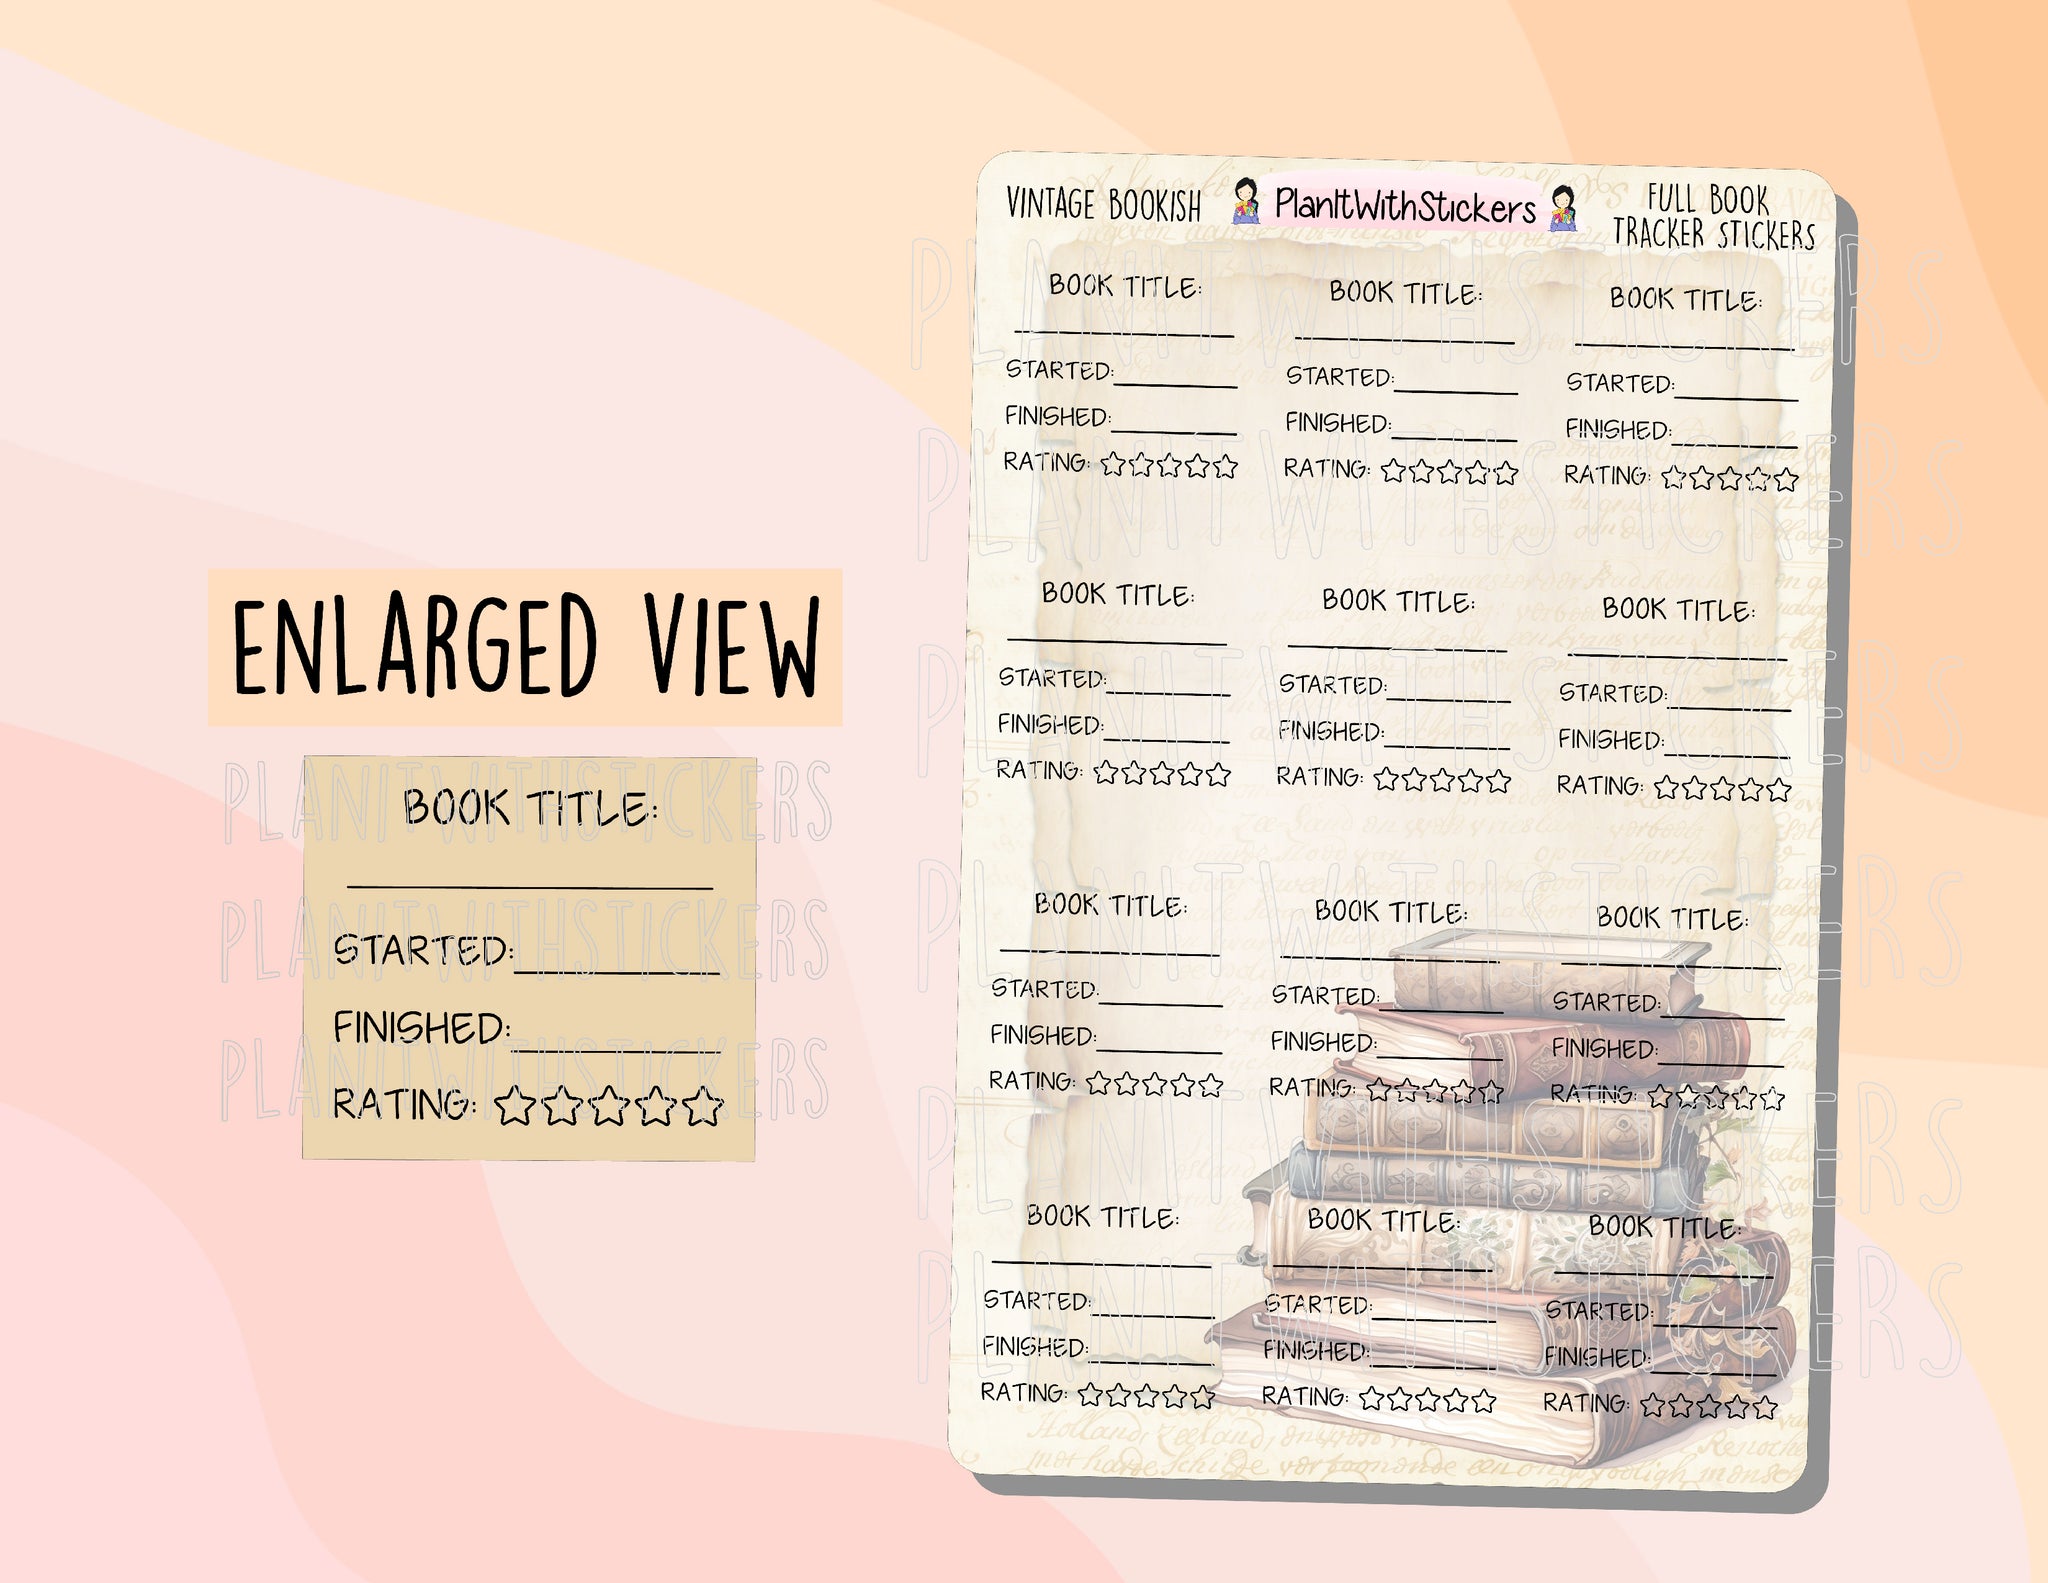 Vintage Library - Full Book Tracker Stickers